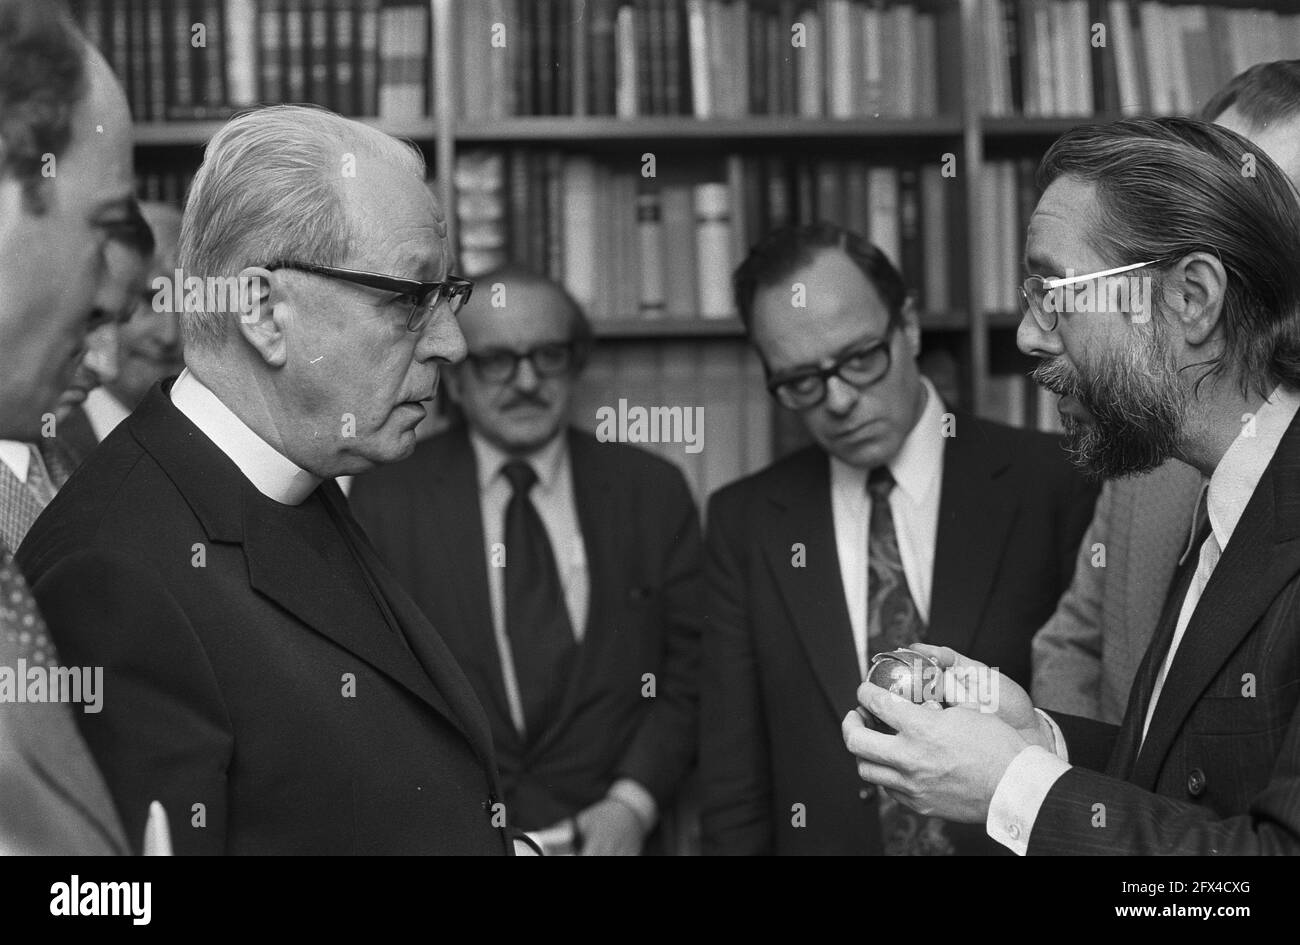 Delegation of American Council of Churches talks with Cardinal Alfrink in Rotterdam about Vietnam, Harvey Cox (r) shows fragmentation bomb to Cardinal Alfrink (r), January 9, 1973, talks, delegations, cardinals, The Netherlands, 20th century press agency photo, news to remember, documentary, historic photography 1945-1990, visual stories, human history of the Twentieth Century, capturing moments in time Stock Photo